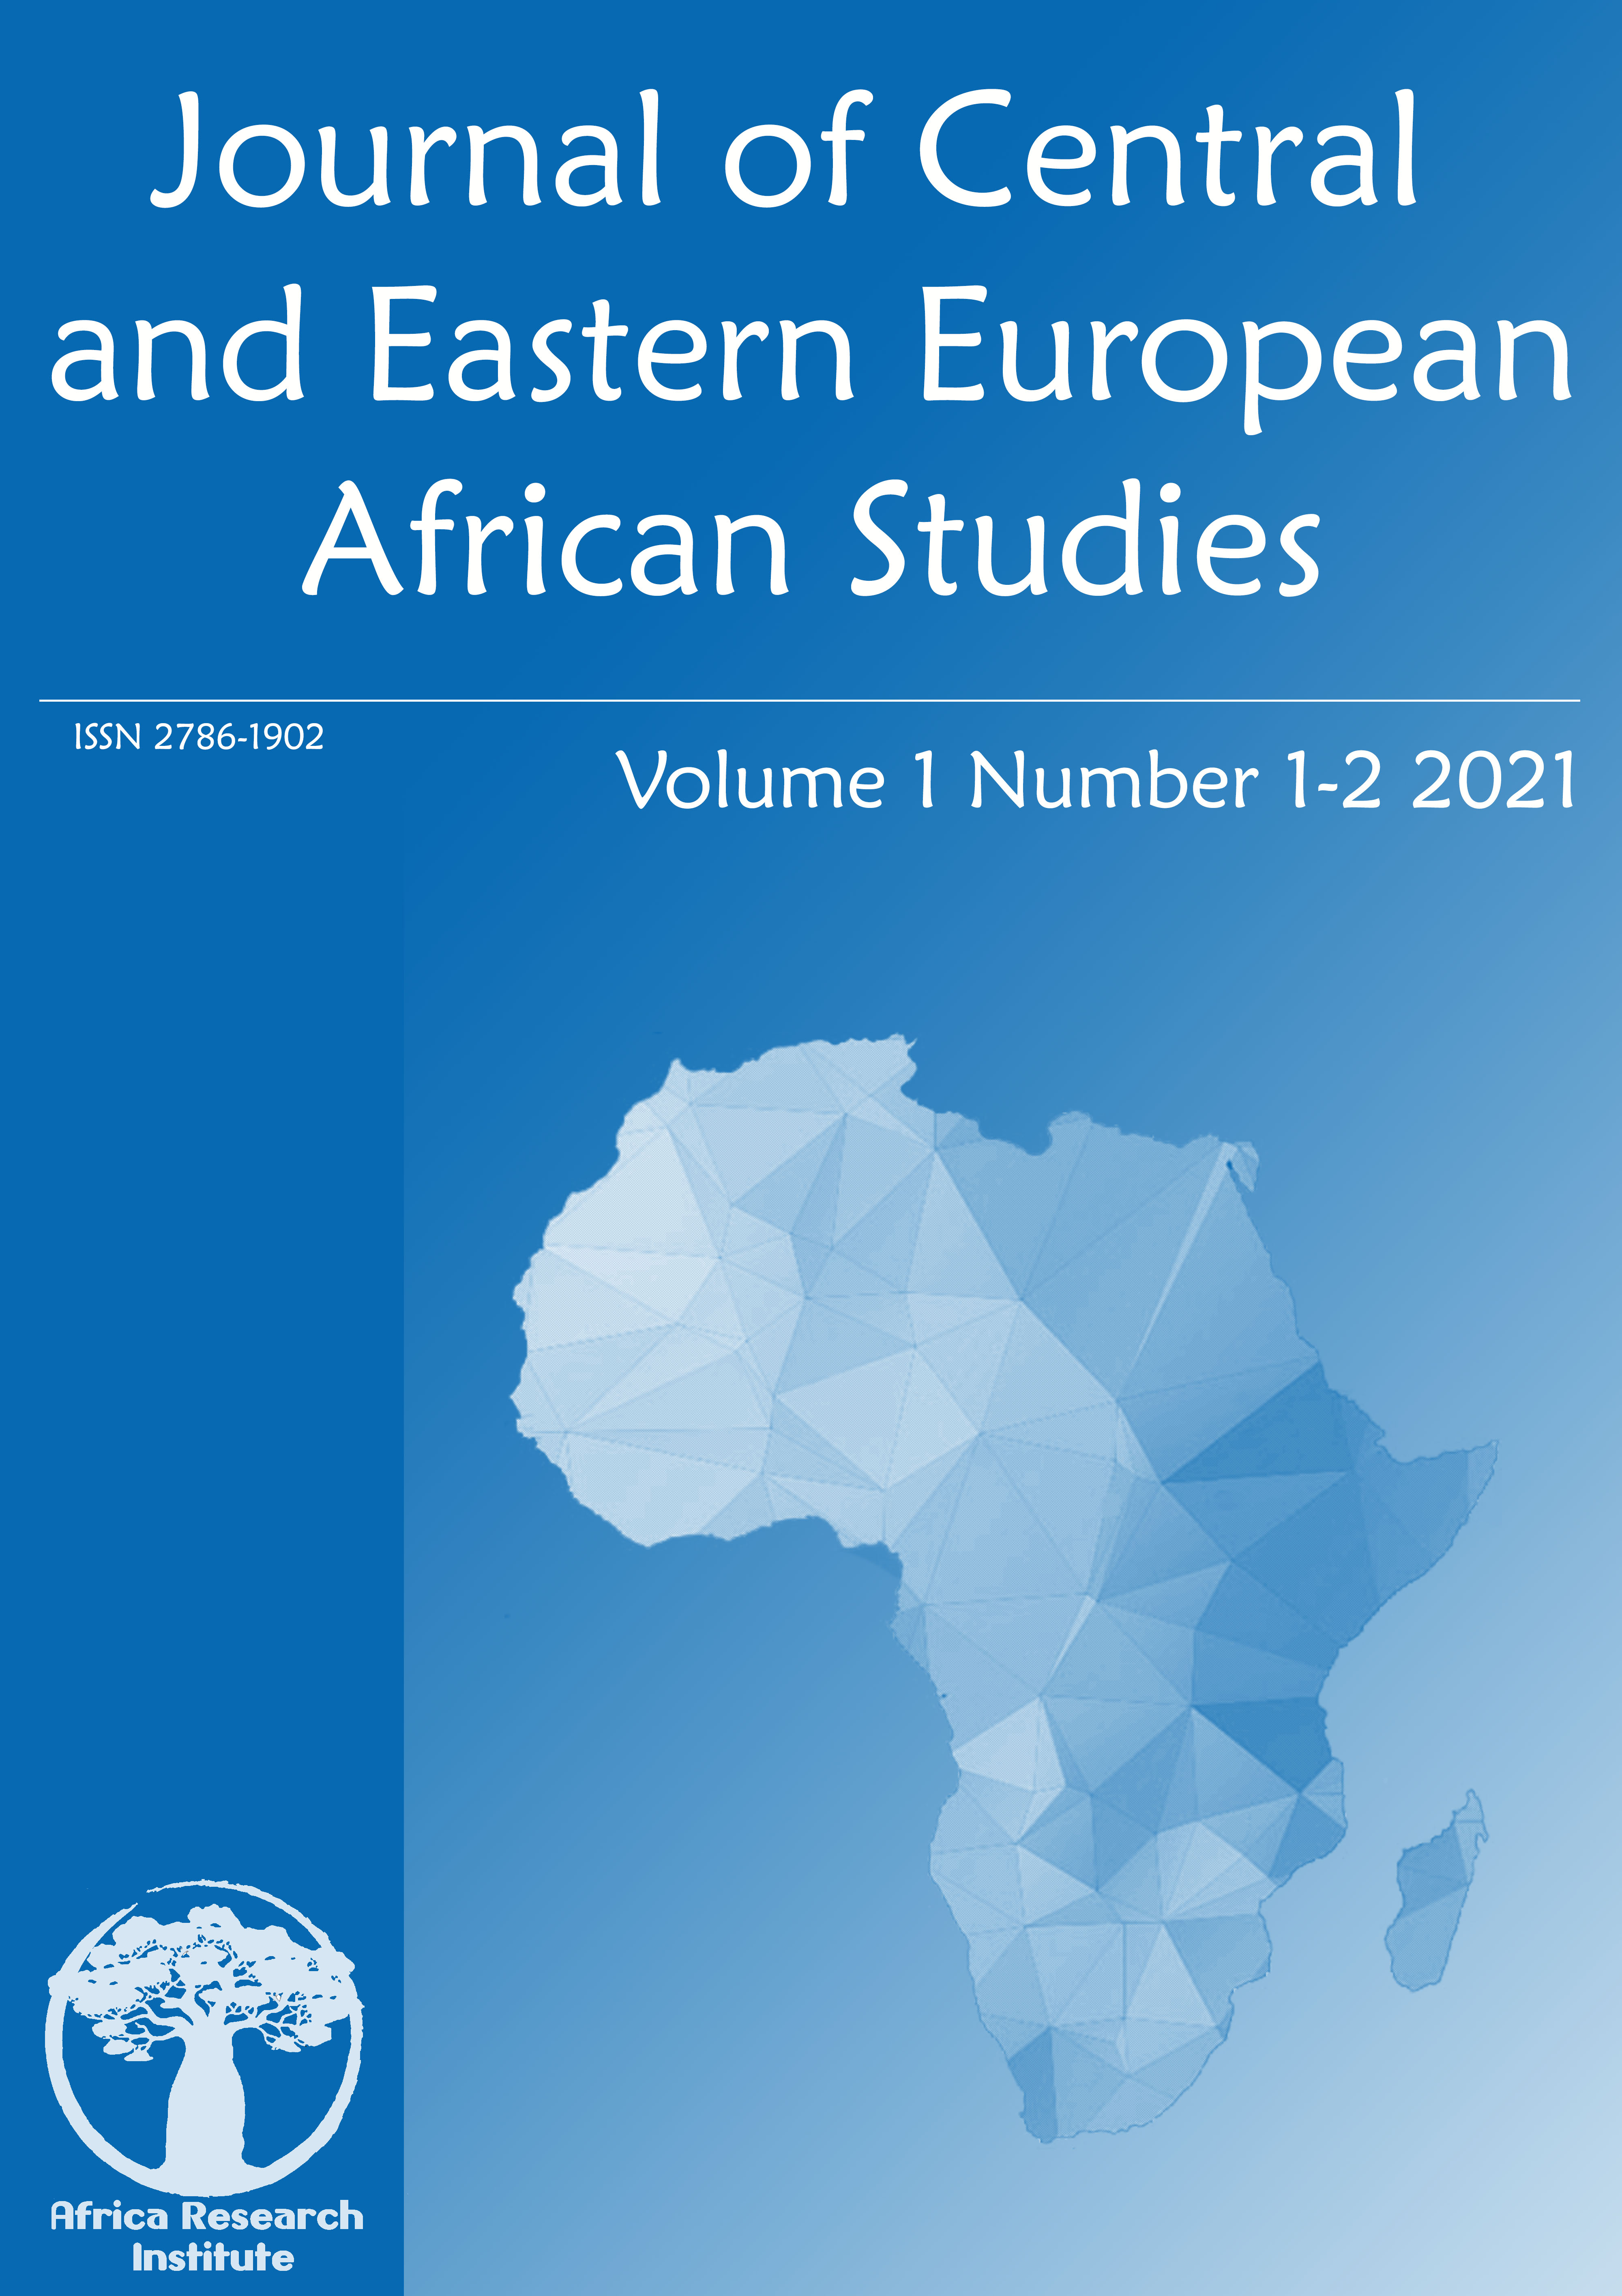 Journal of Central and Eastern European African Studies Volume 1 Number 1-2 2021